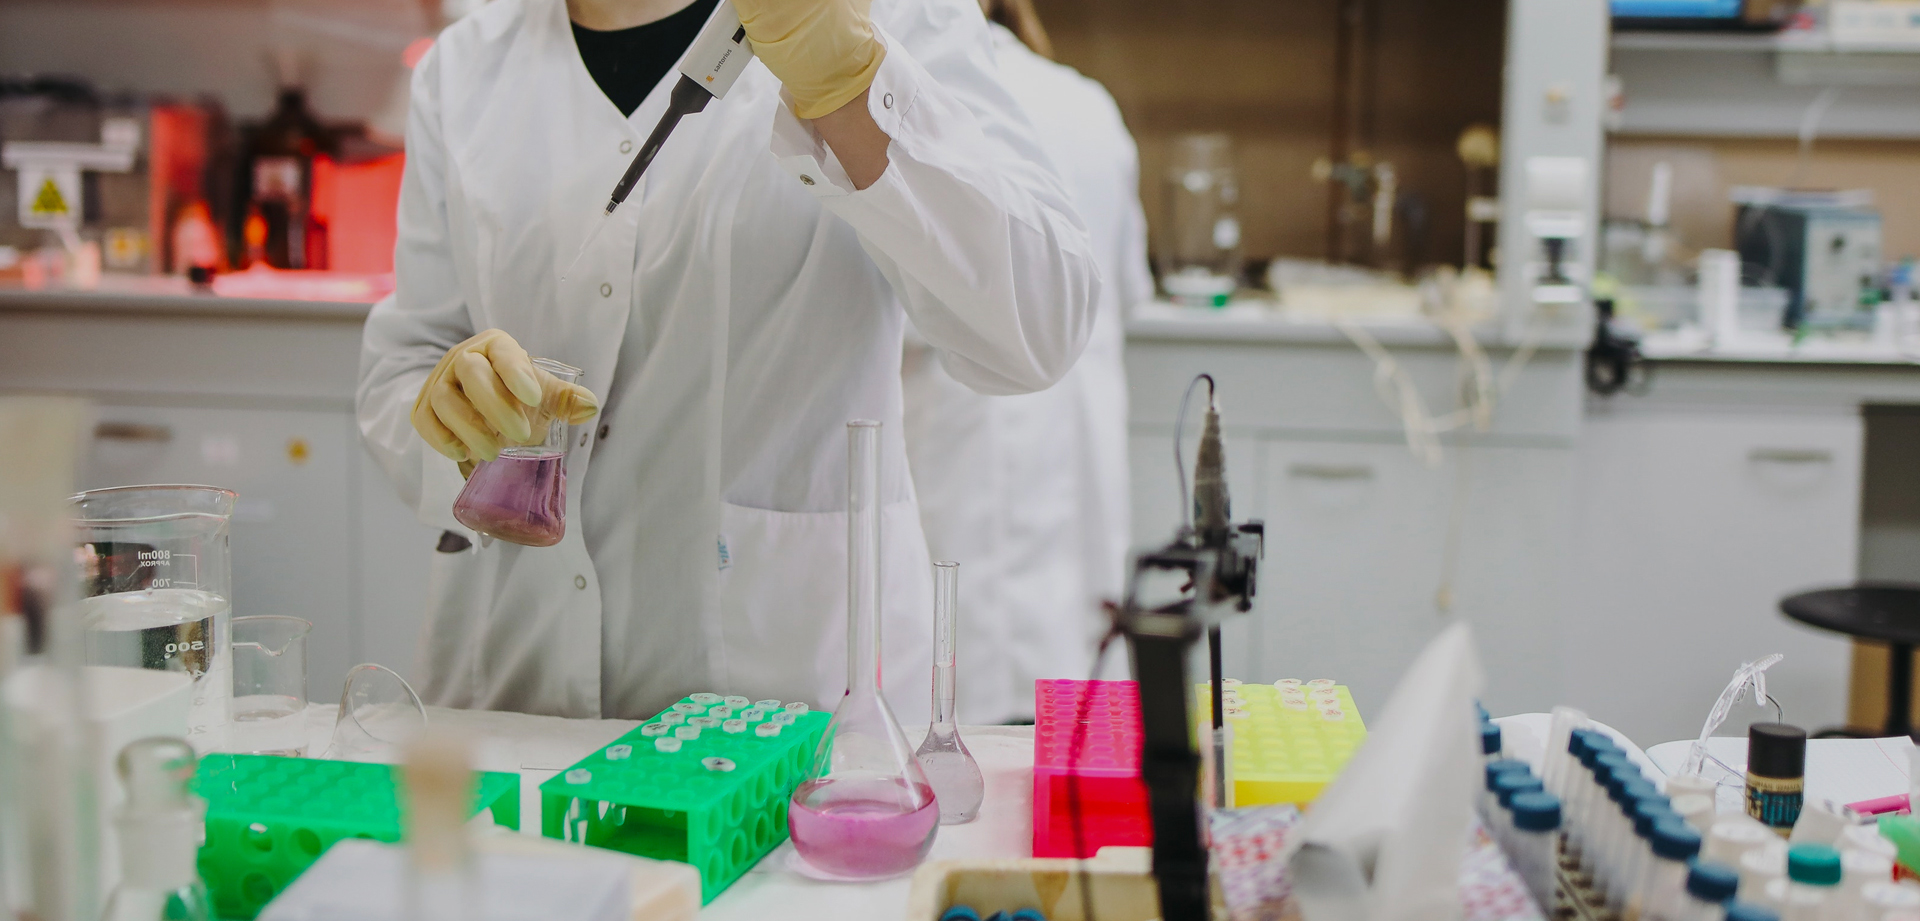 The report outlines and highlights these key findings of the state’s life science industry. (Photo courtesy of Biocom)